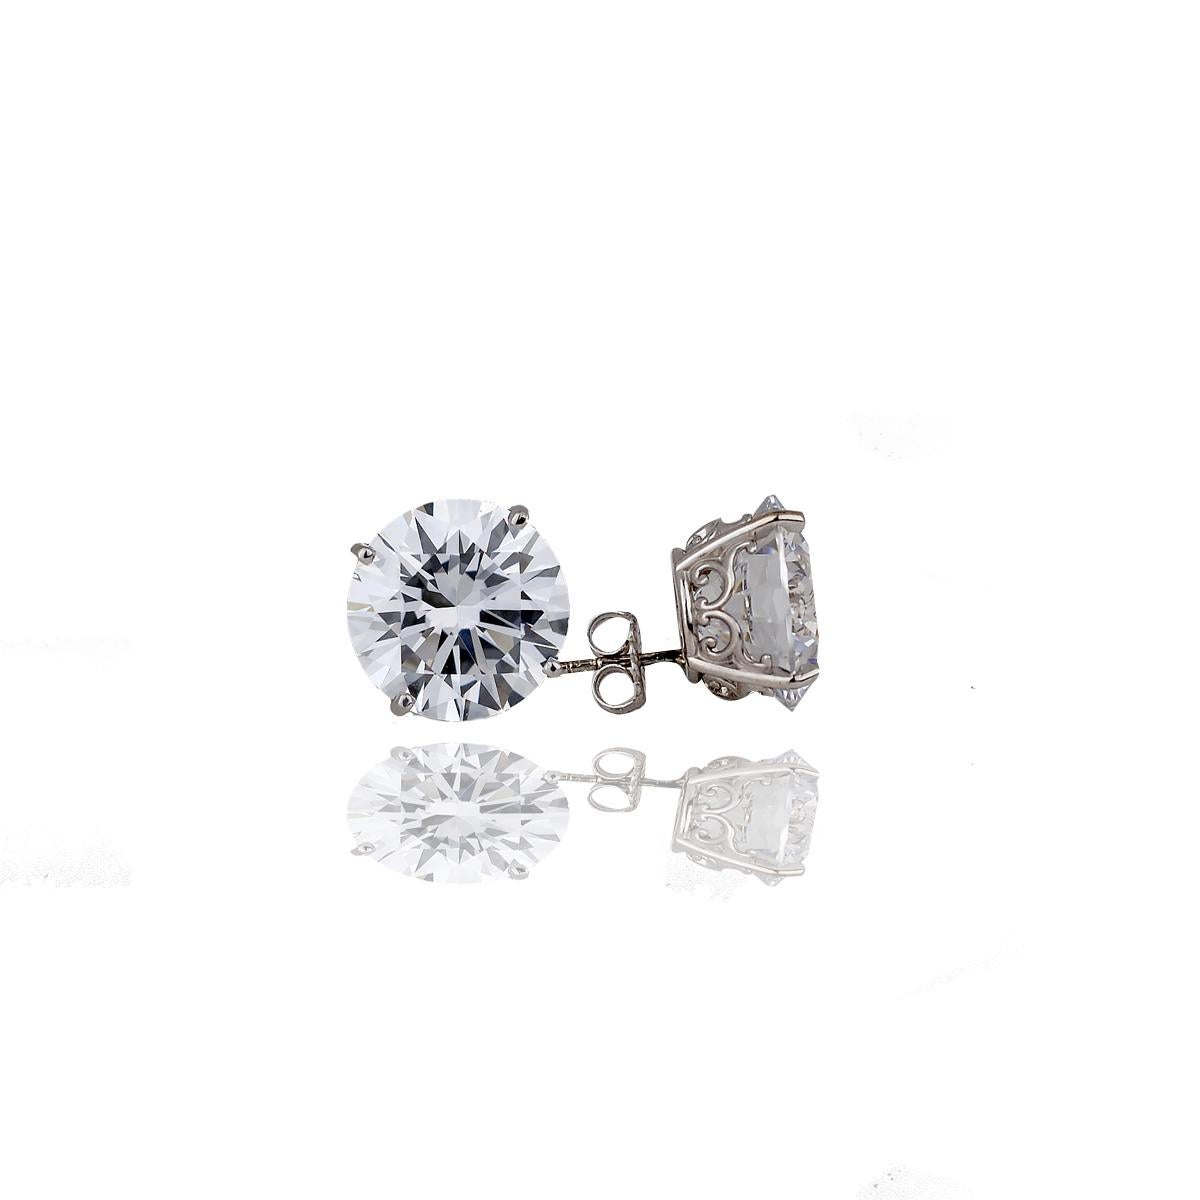 Each stud is a beautiful set 5 Carat. The total weight of the earrings are 10 TCW- 11 mm 14 Karat White Gold 
Custom designed, earring studs measuring 11 millimeters each. Total weight of both stones is 10 carats. 
Center stone is a high quality